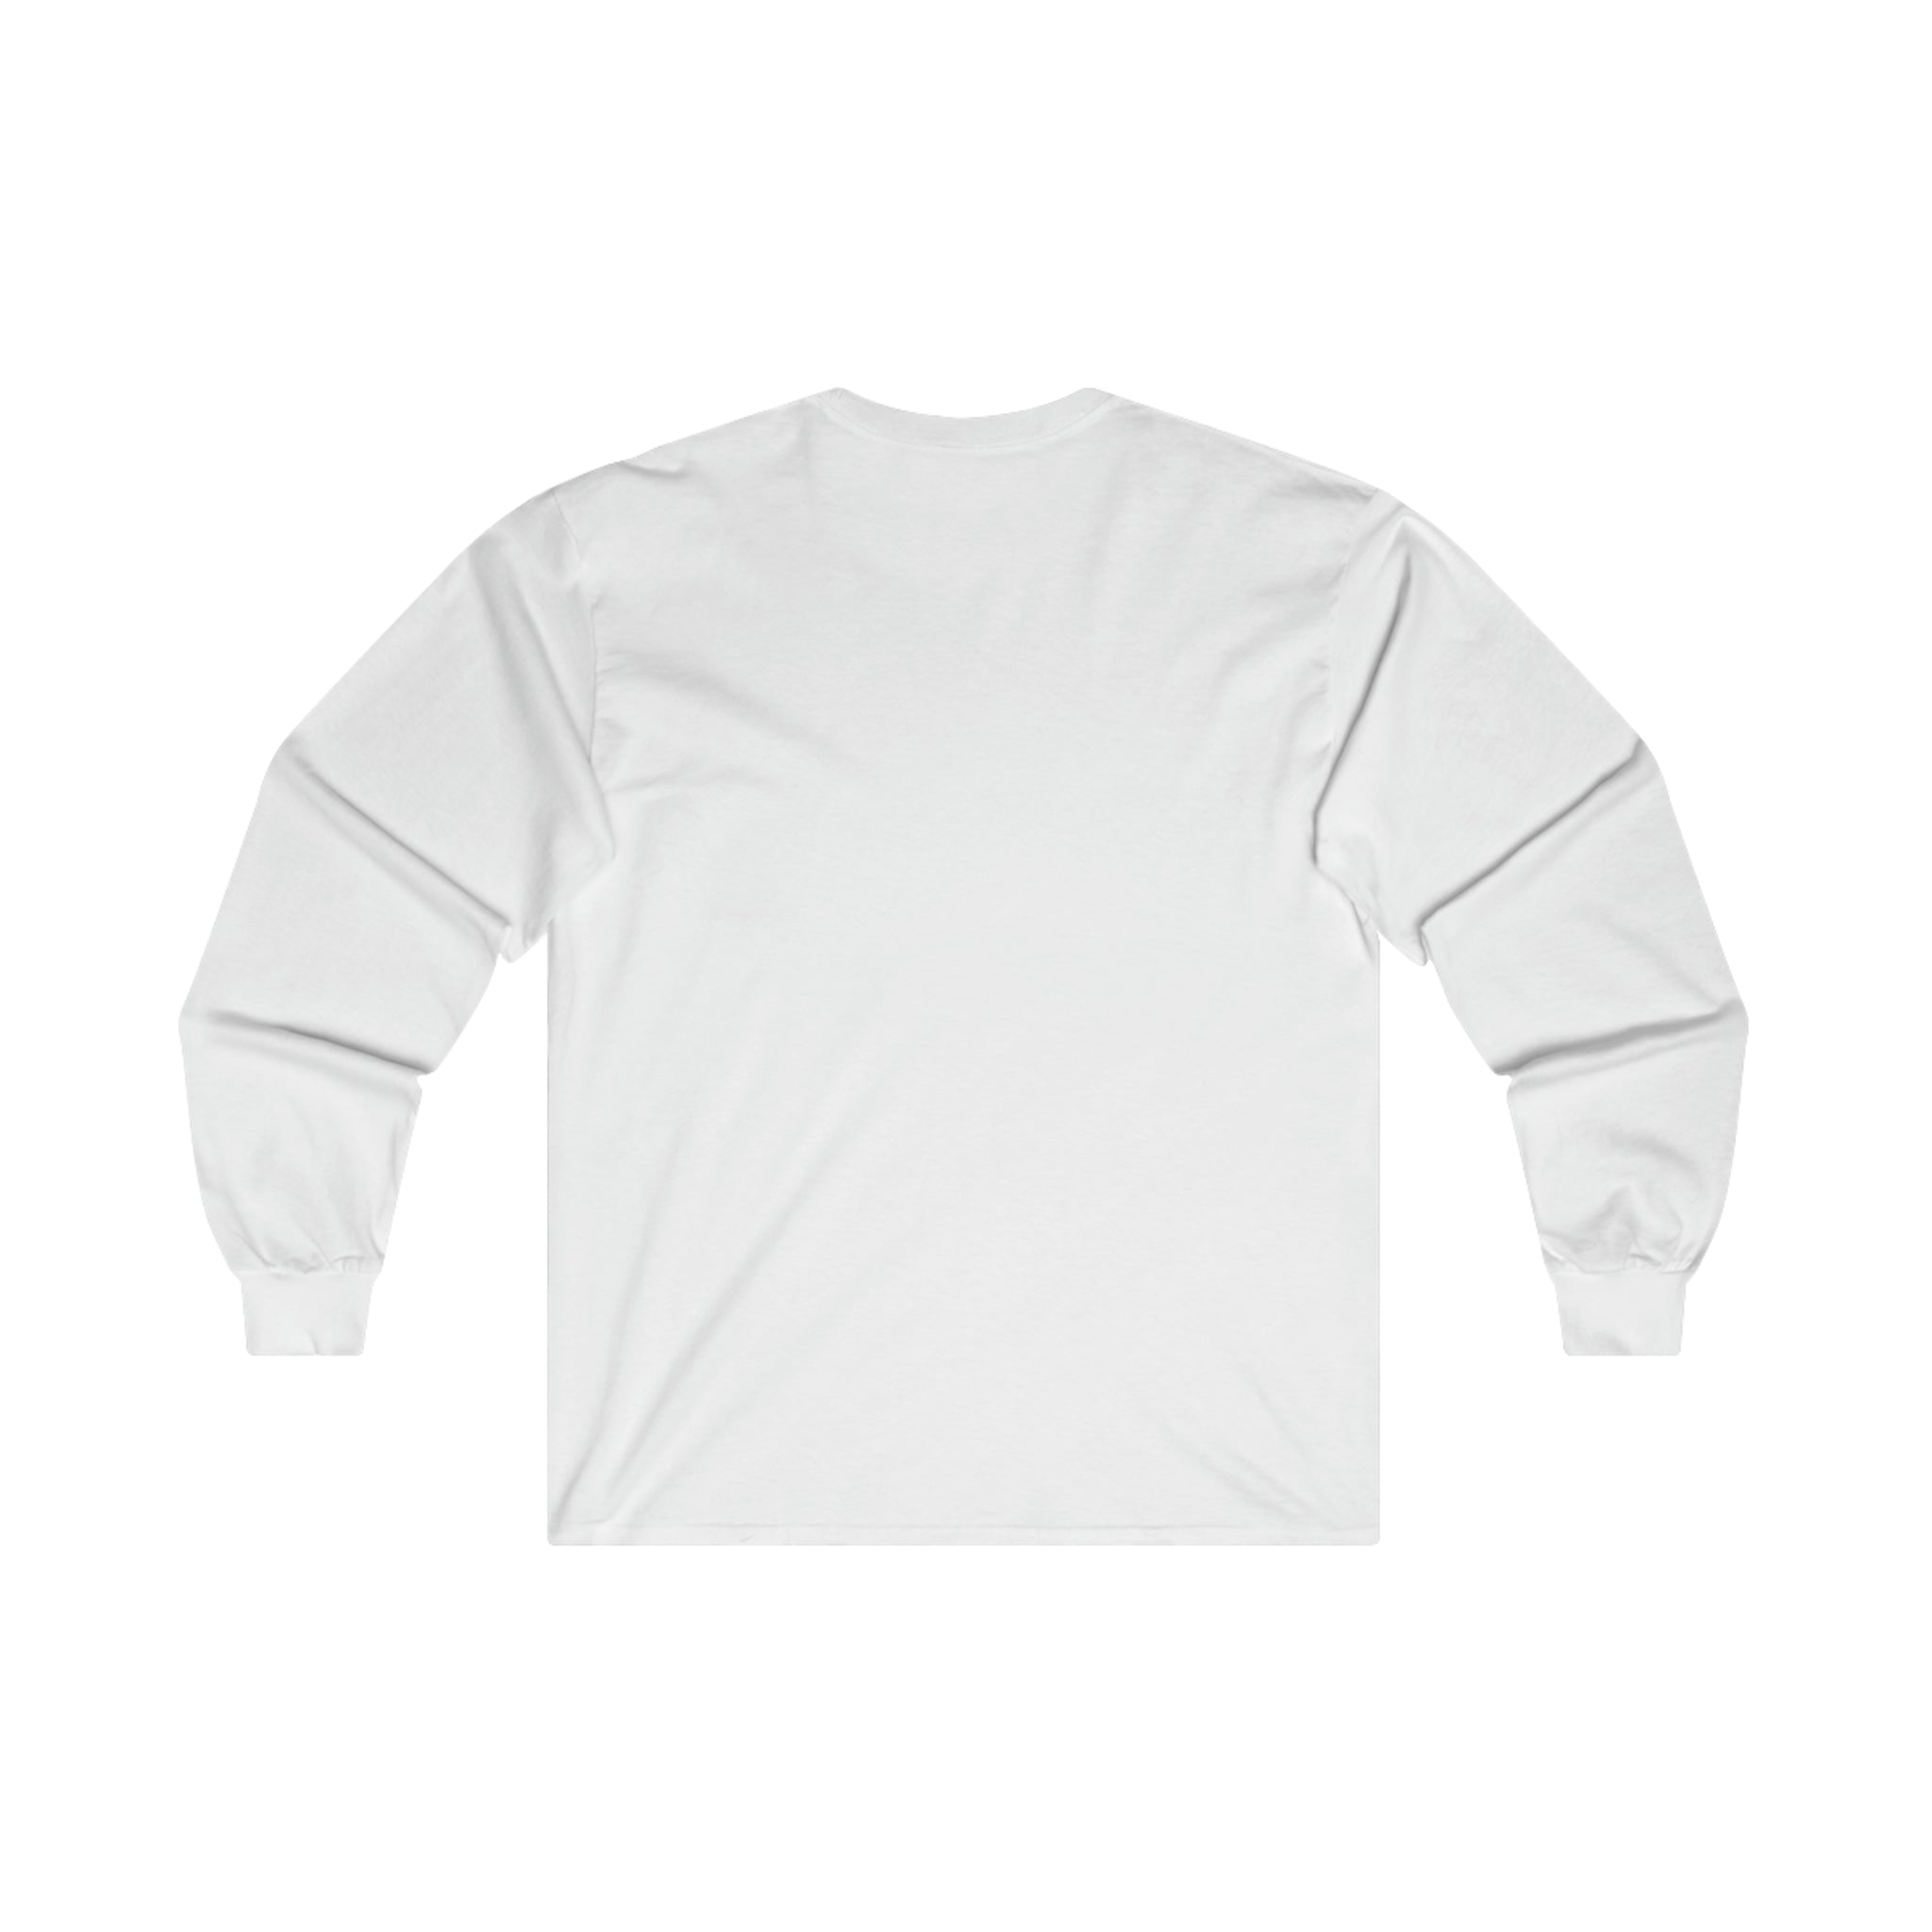 Sometimes this is dinner Busch and Zyns - Ultra Cotton Long Sleeve Tee